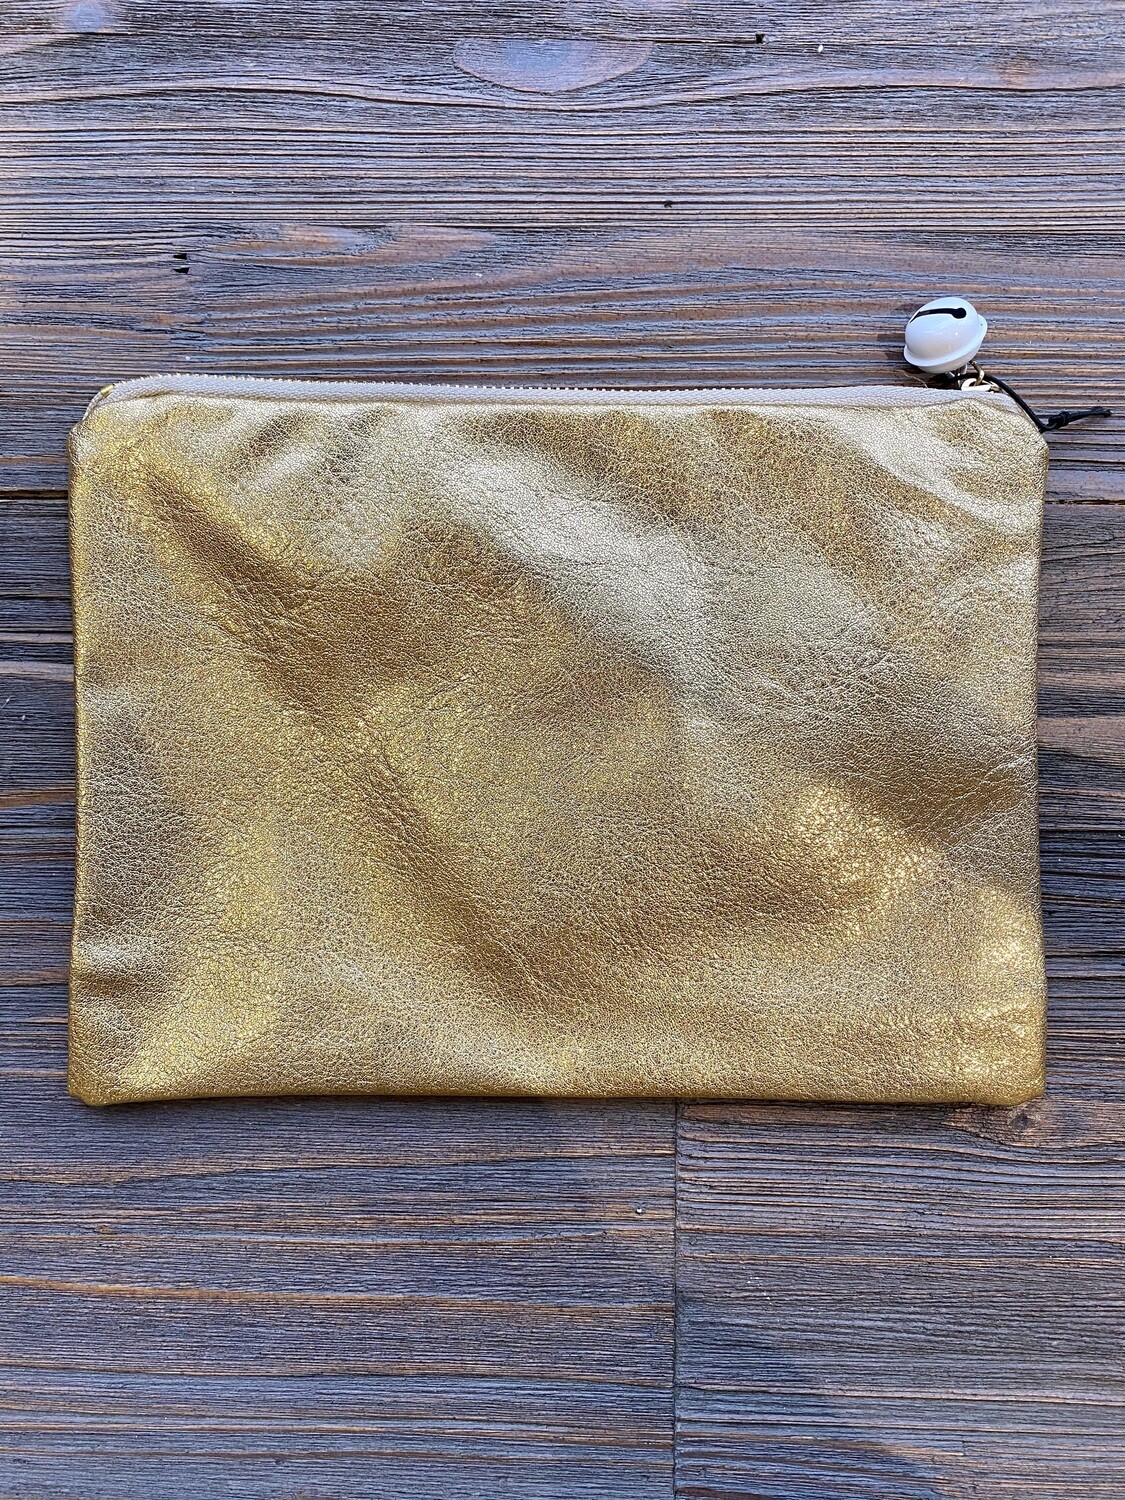 10 x 7 Gold Fabric Pouch With Jingle Bell